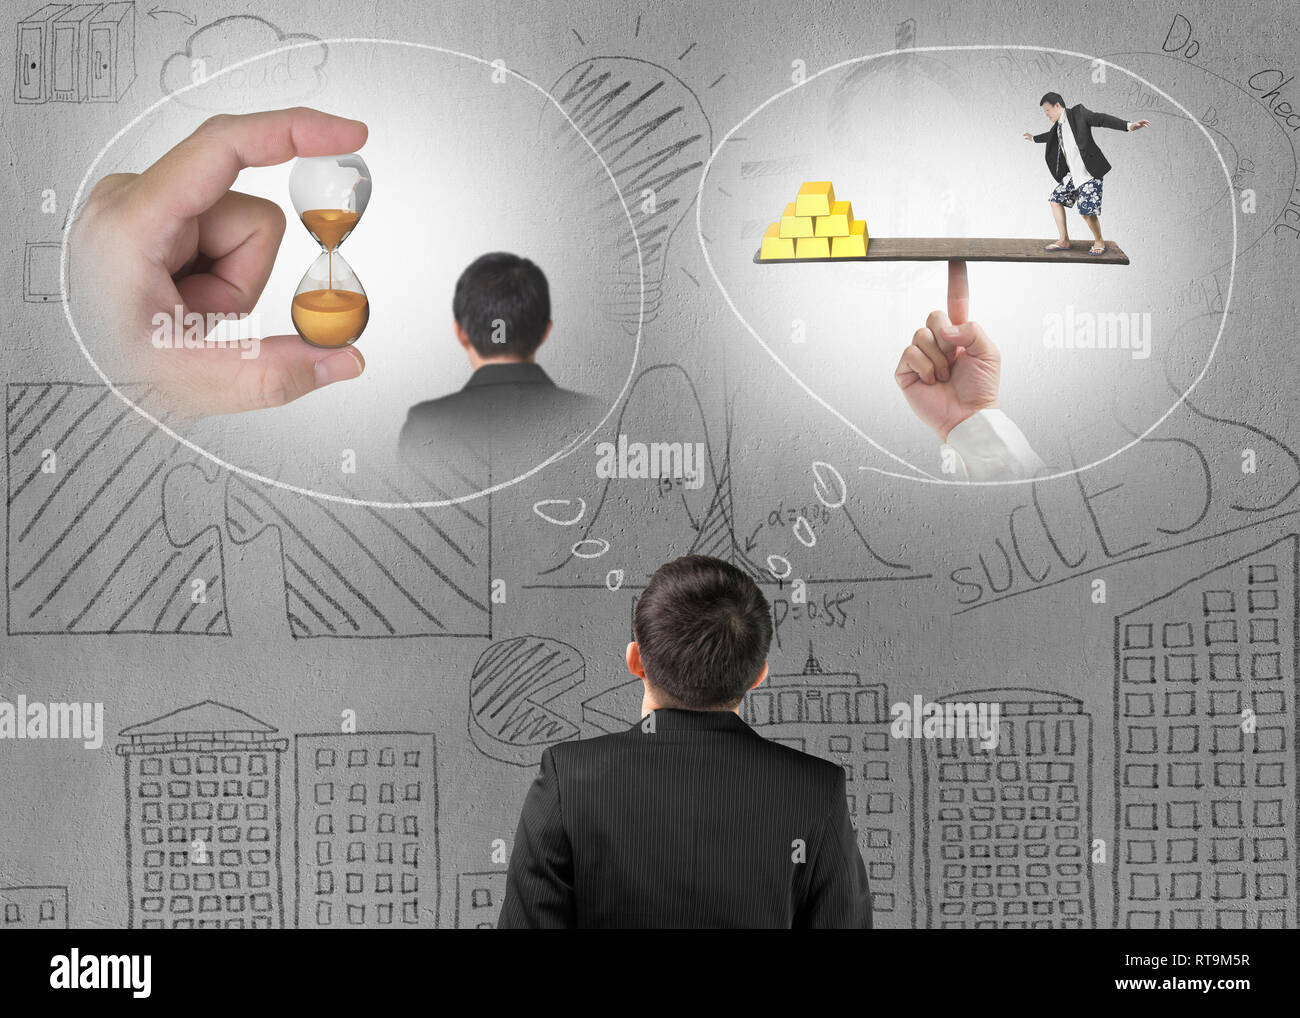 Businessman imagining work situation with doodles concrete wall background Stock Photo